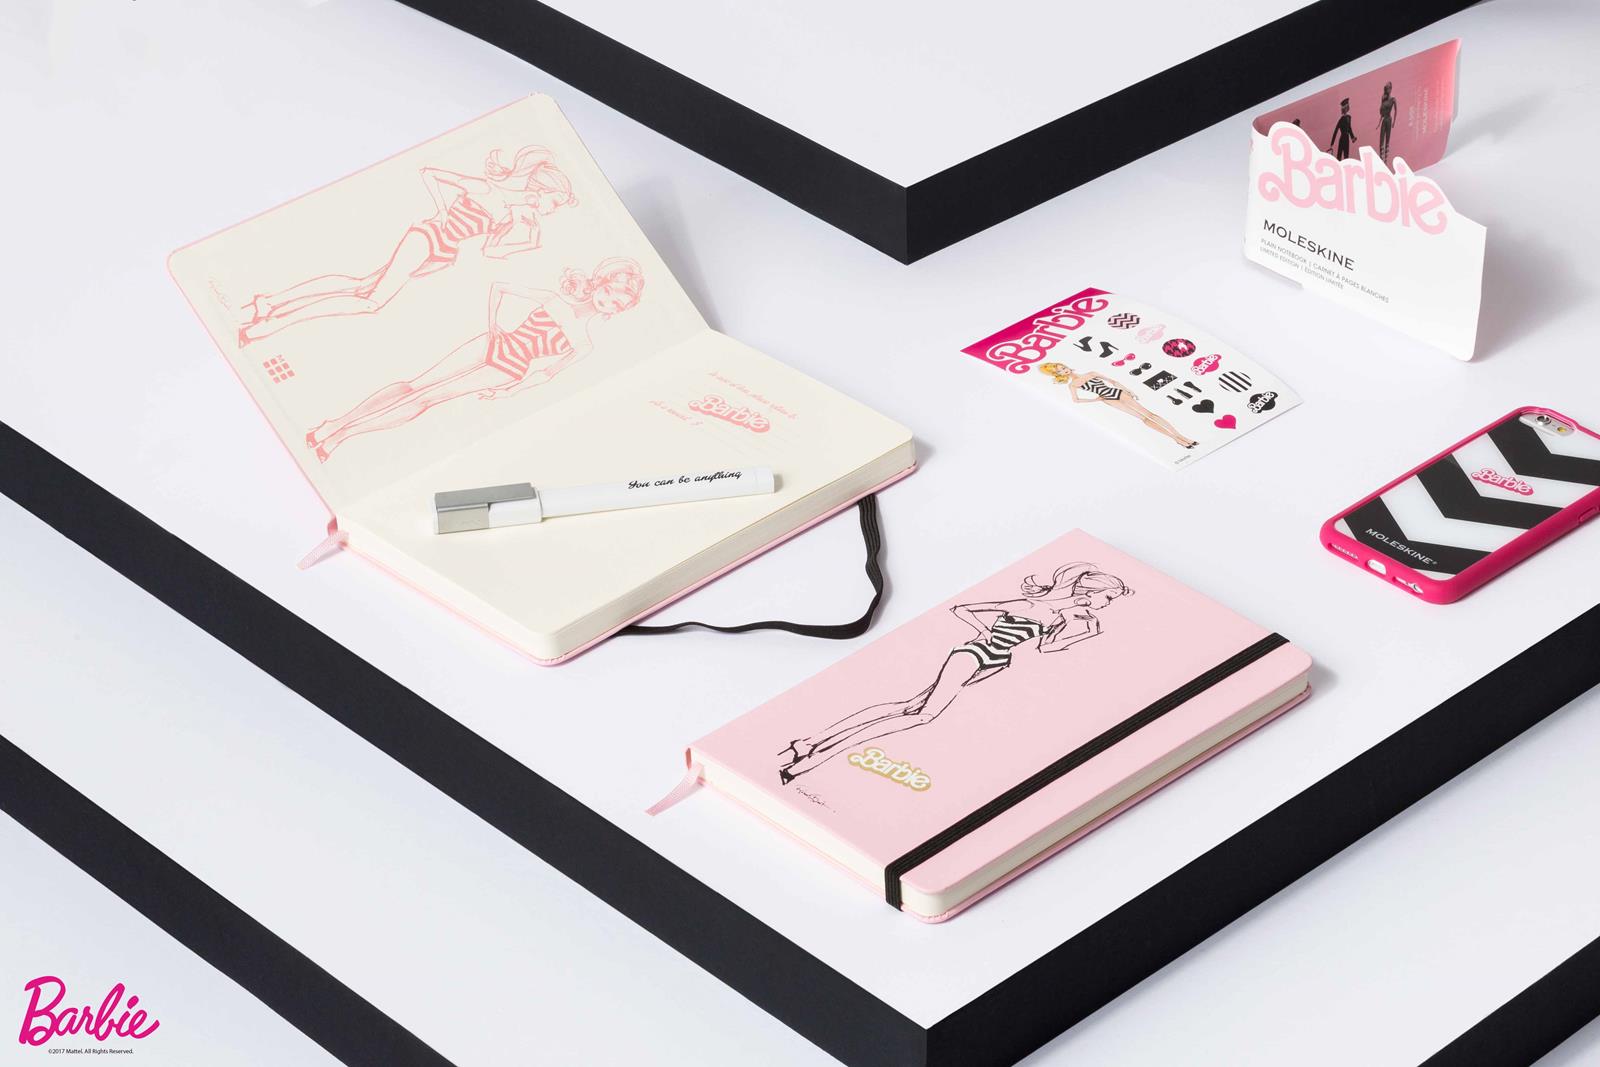 Moleskine Barbie Limited Edition Collection